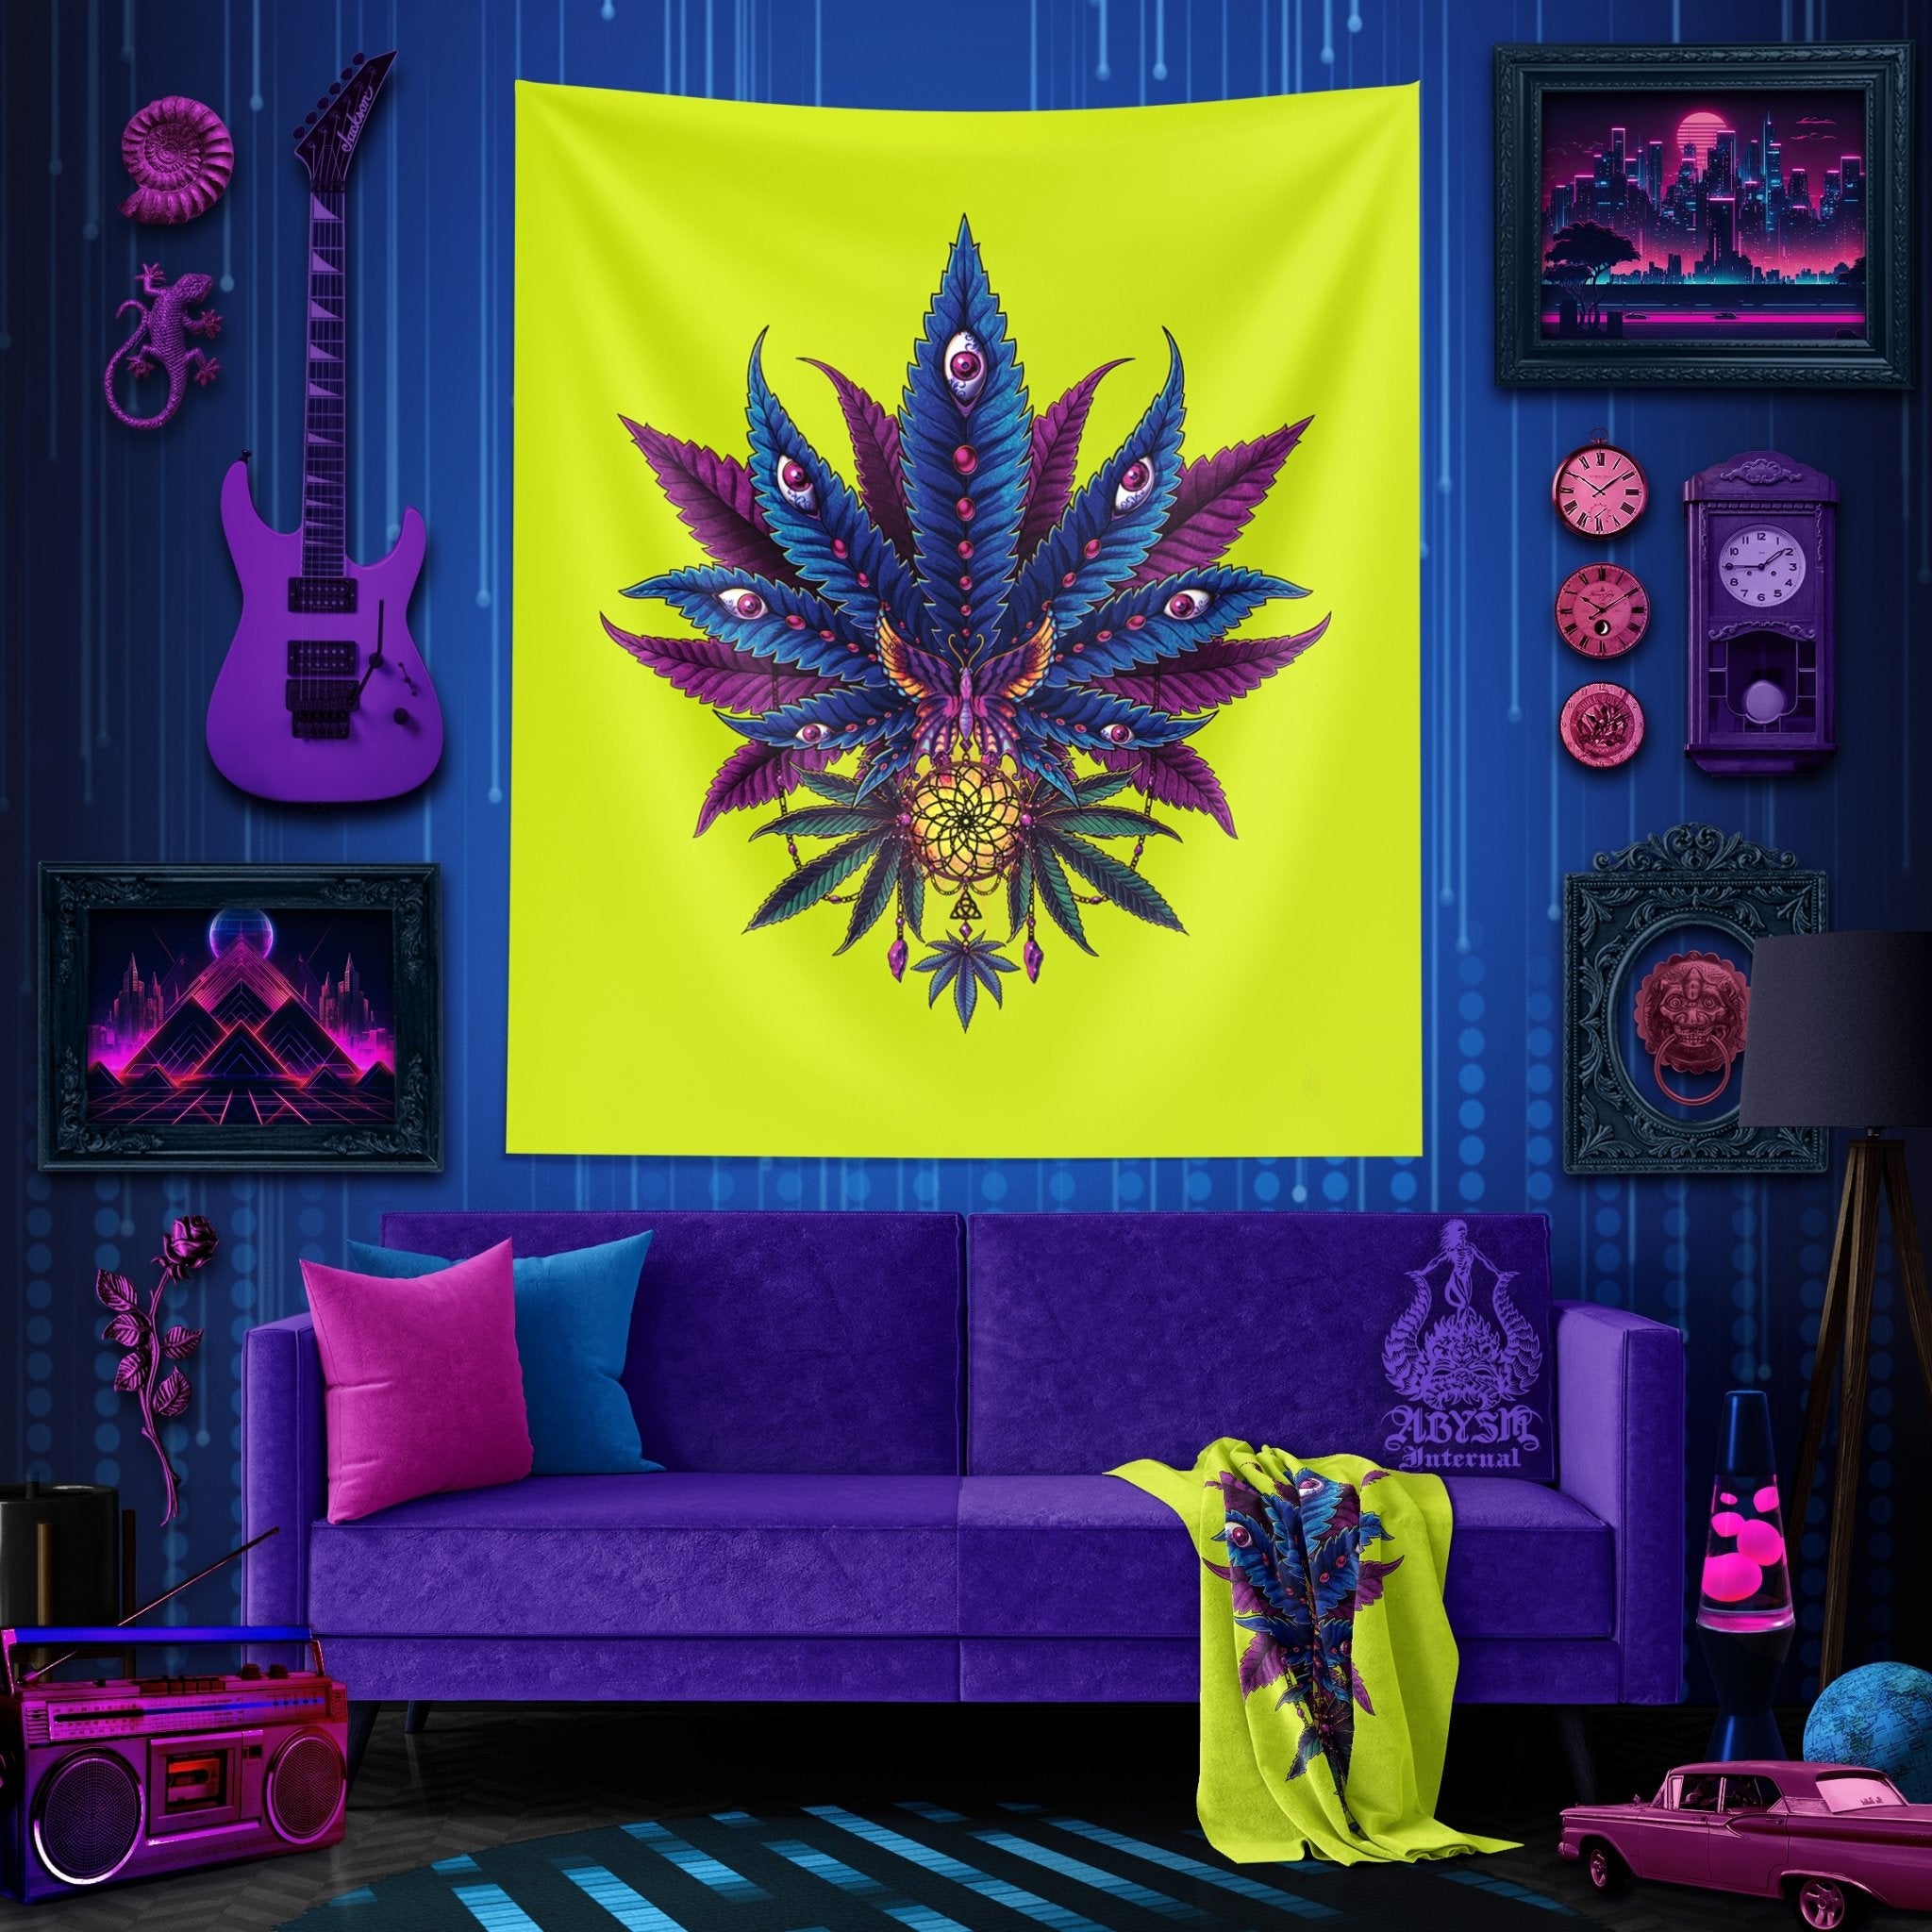 Weed Tapestry, Synthwave Cannabis Shop Decor, 420 Wall Hanging, Retrowave 80s Home Decor, Vaporwave Art Print, Eclectic and Funky Marijuana - Neon II - Abysm Internal